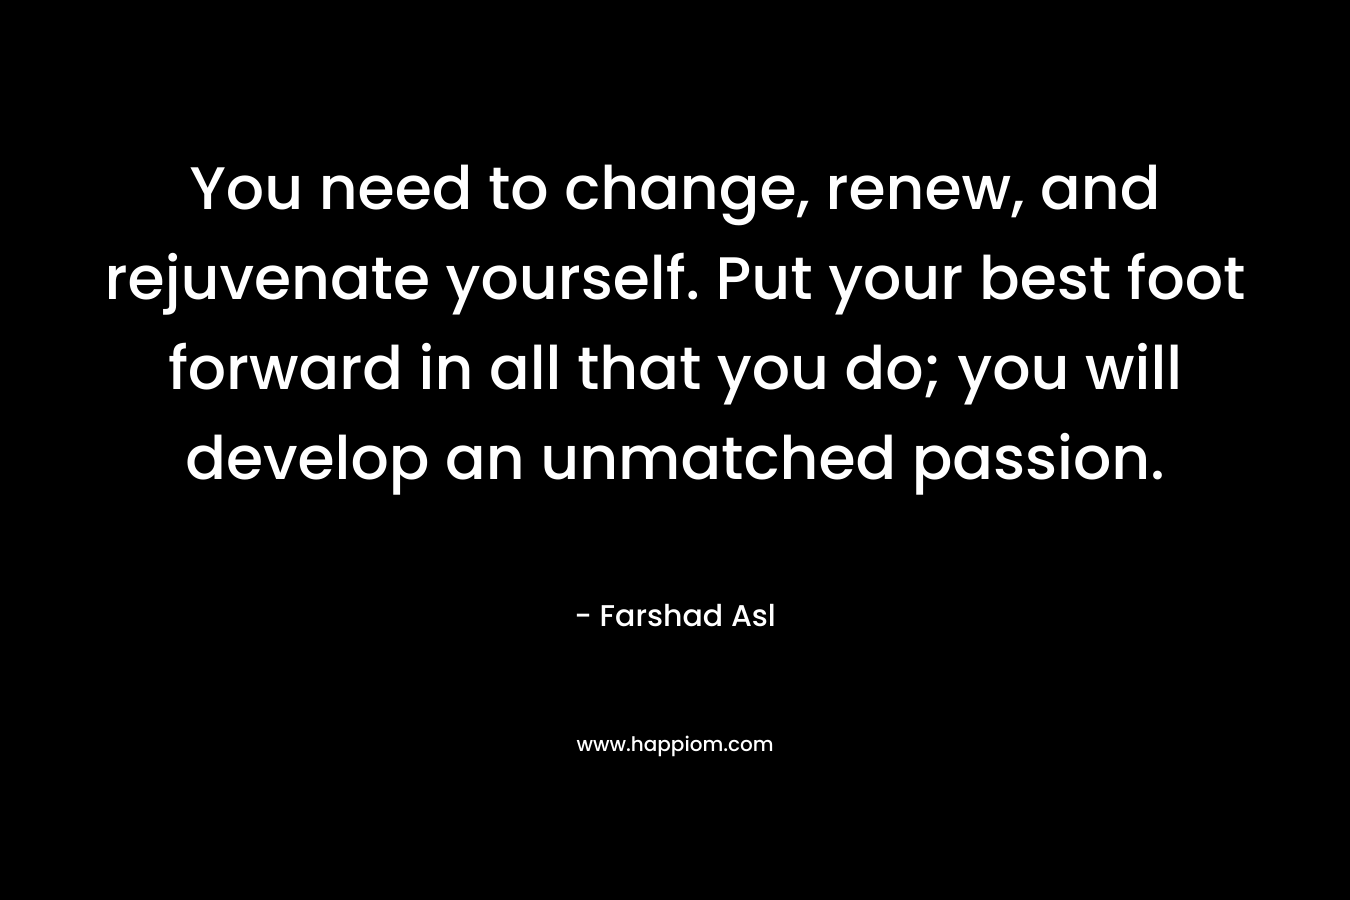 You need to change, renew, and rejuvenate yourself. Put your best foot forward in all that you do; you will develop an unmatched passion. – Farshad Asl